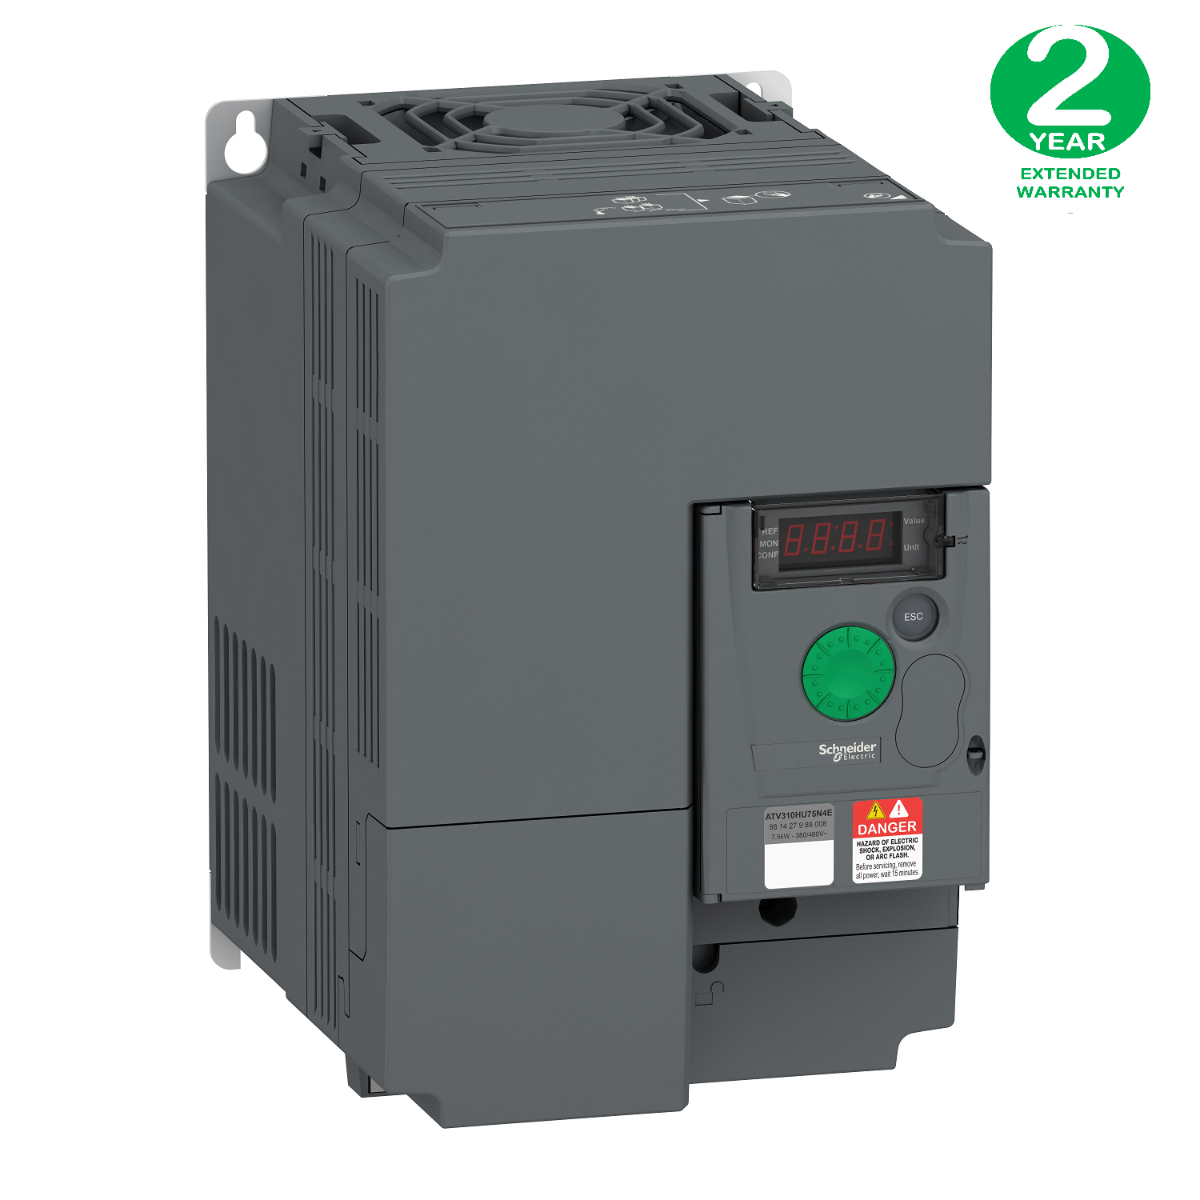 variable speed drive ATV310, 7.5 kW, 10 hp, 380...460 V, 3 phase, without filter